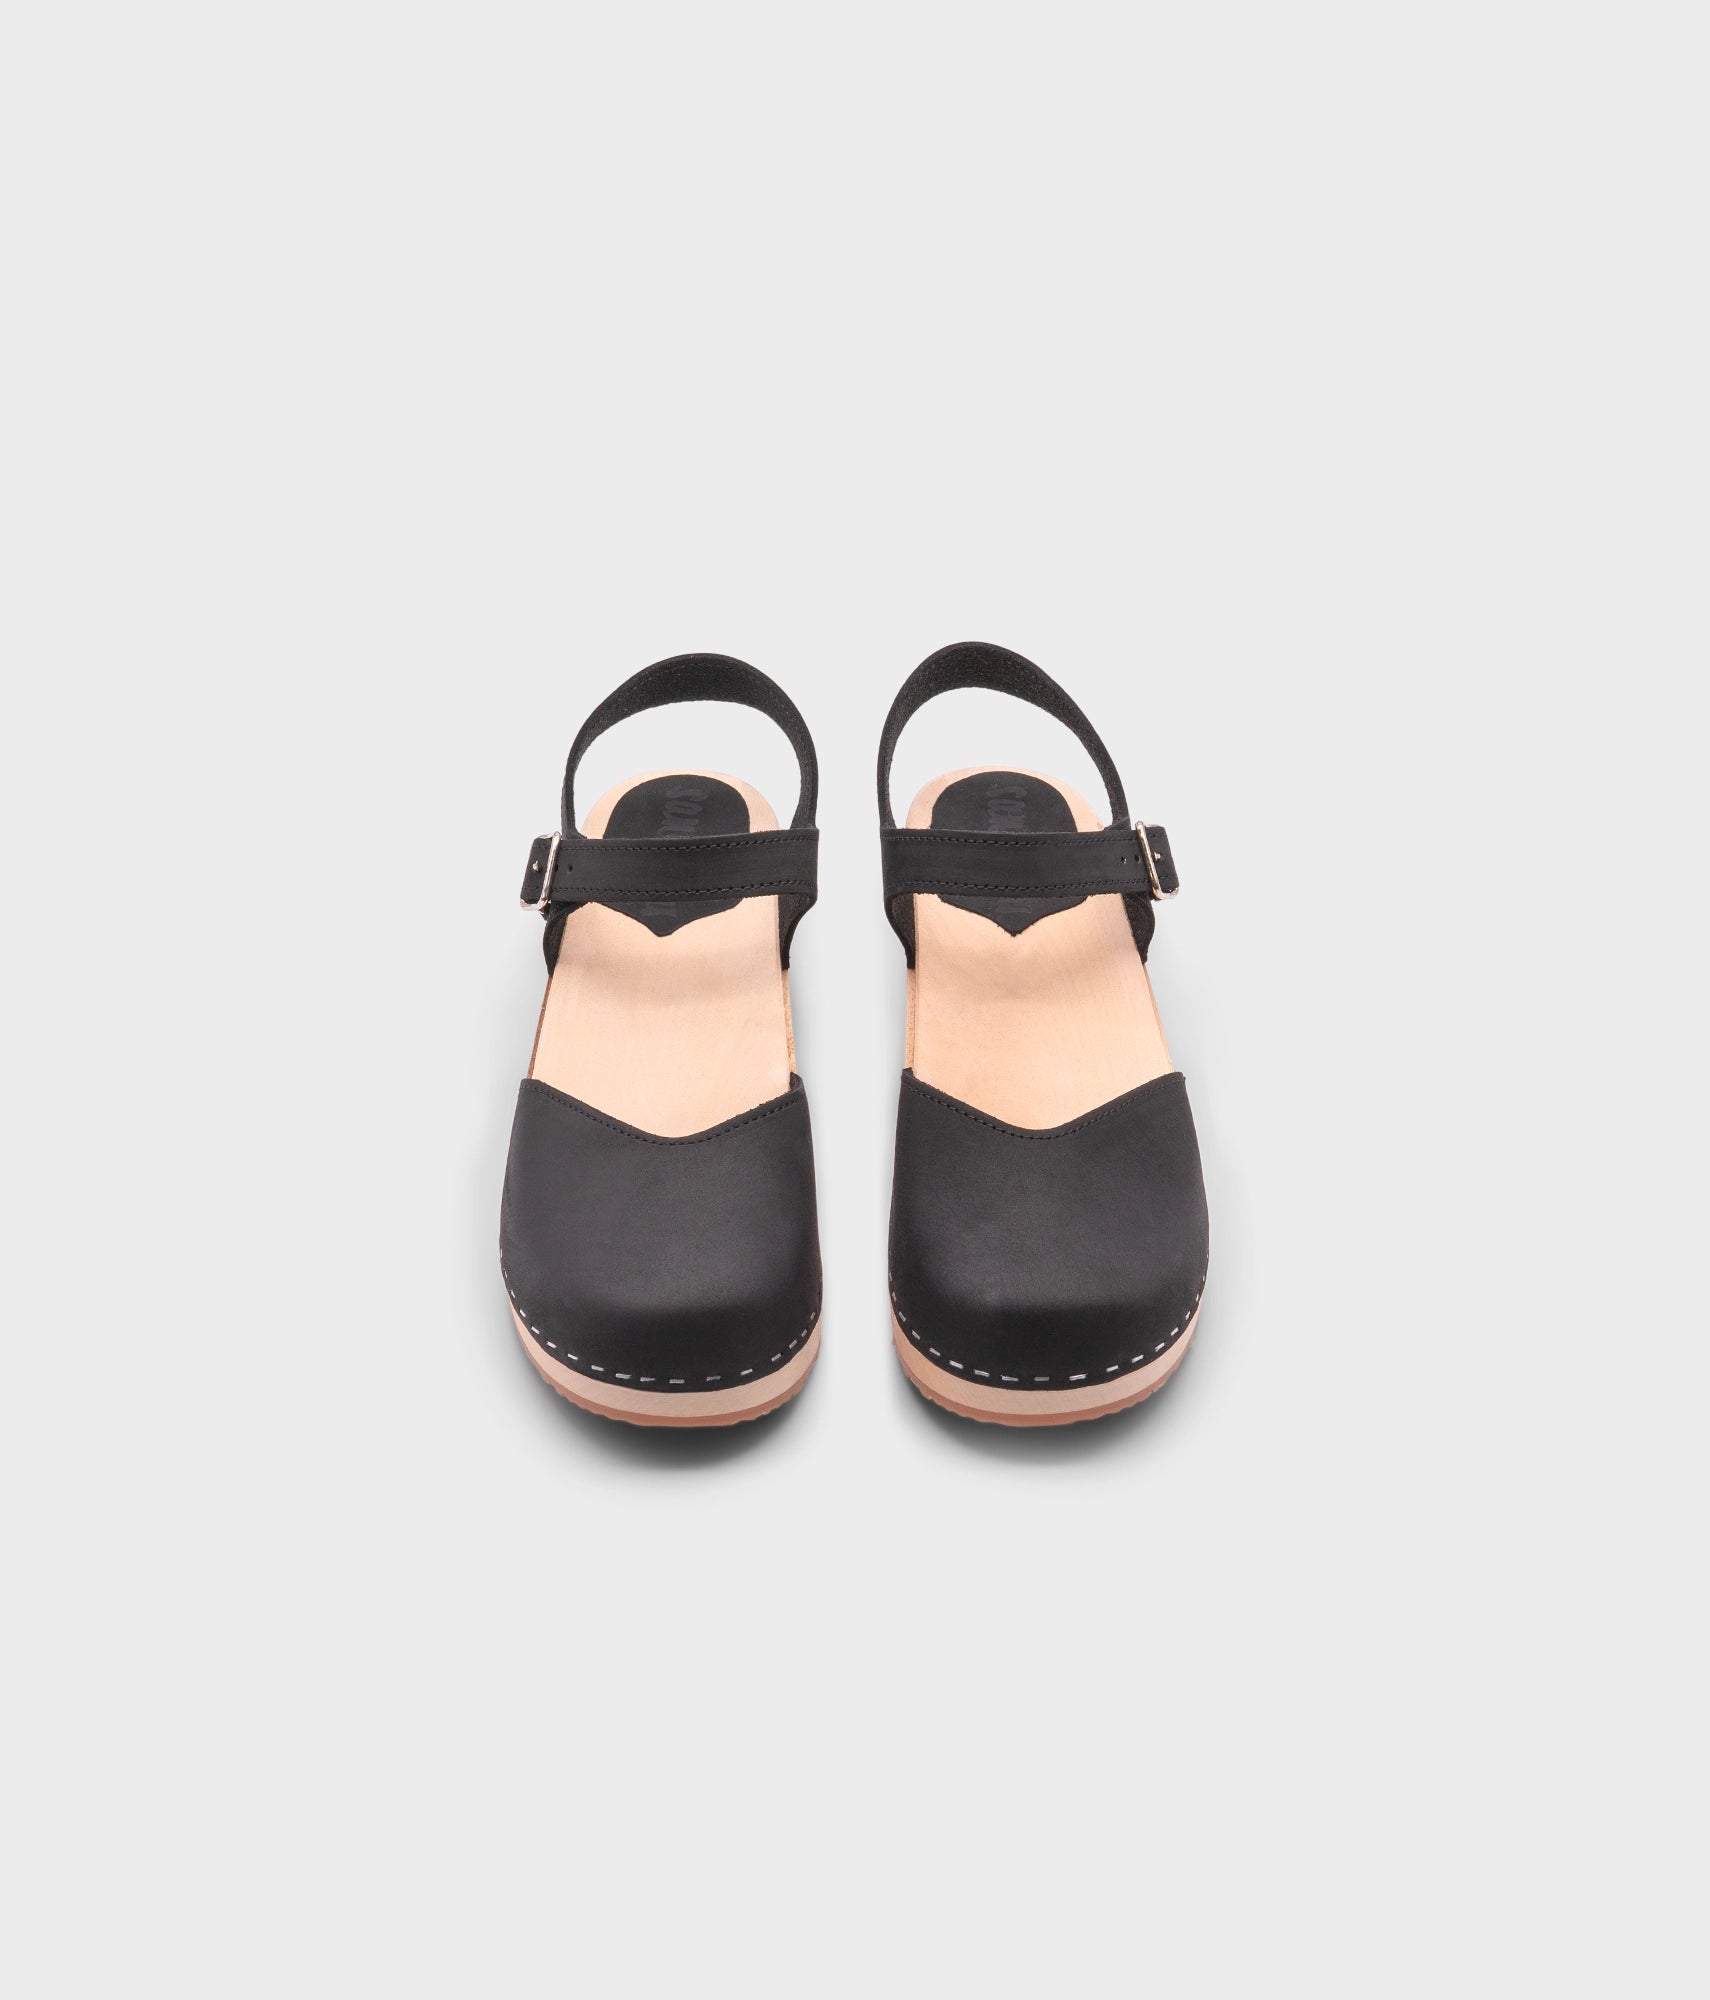 classic low heeled closed-toe sandal in black nubuck leather stapled on a light wooden base